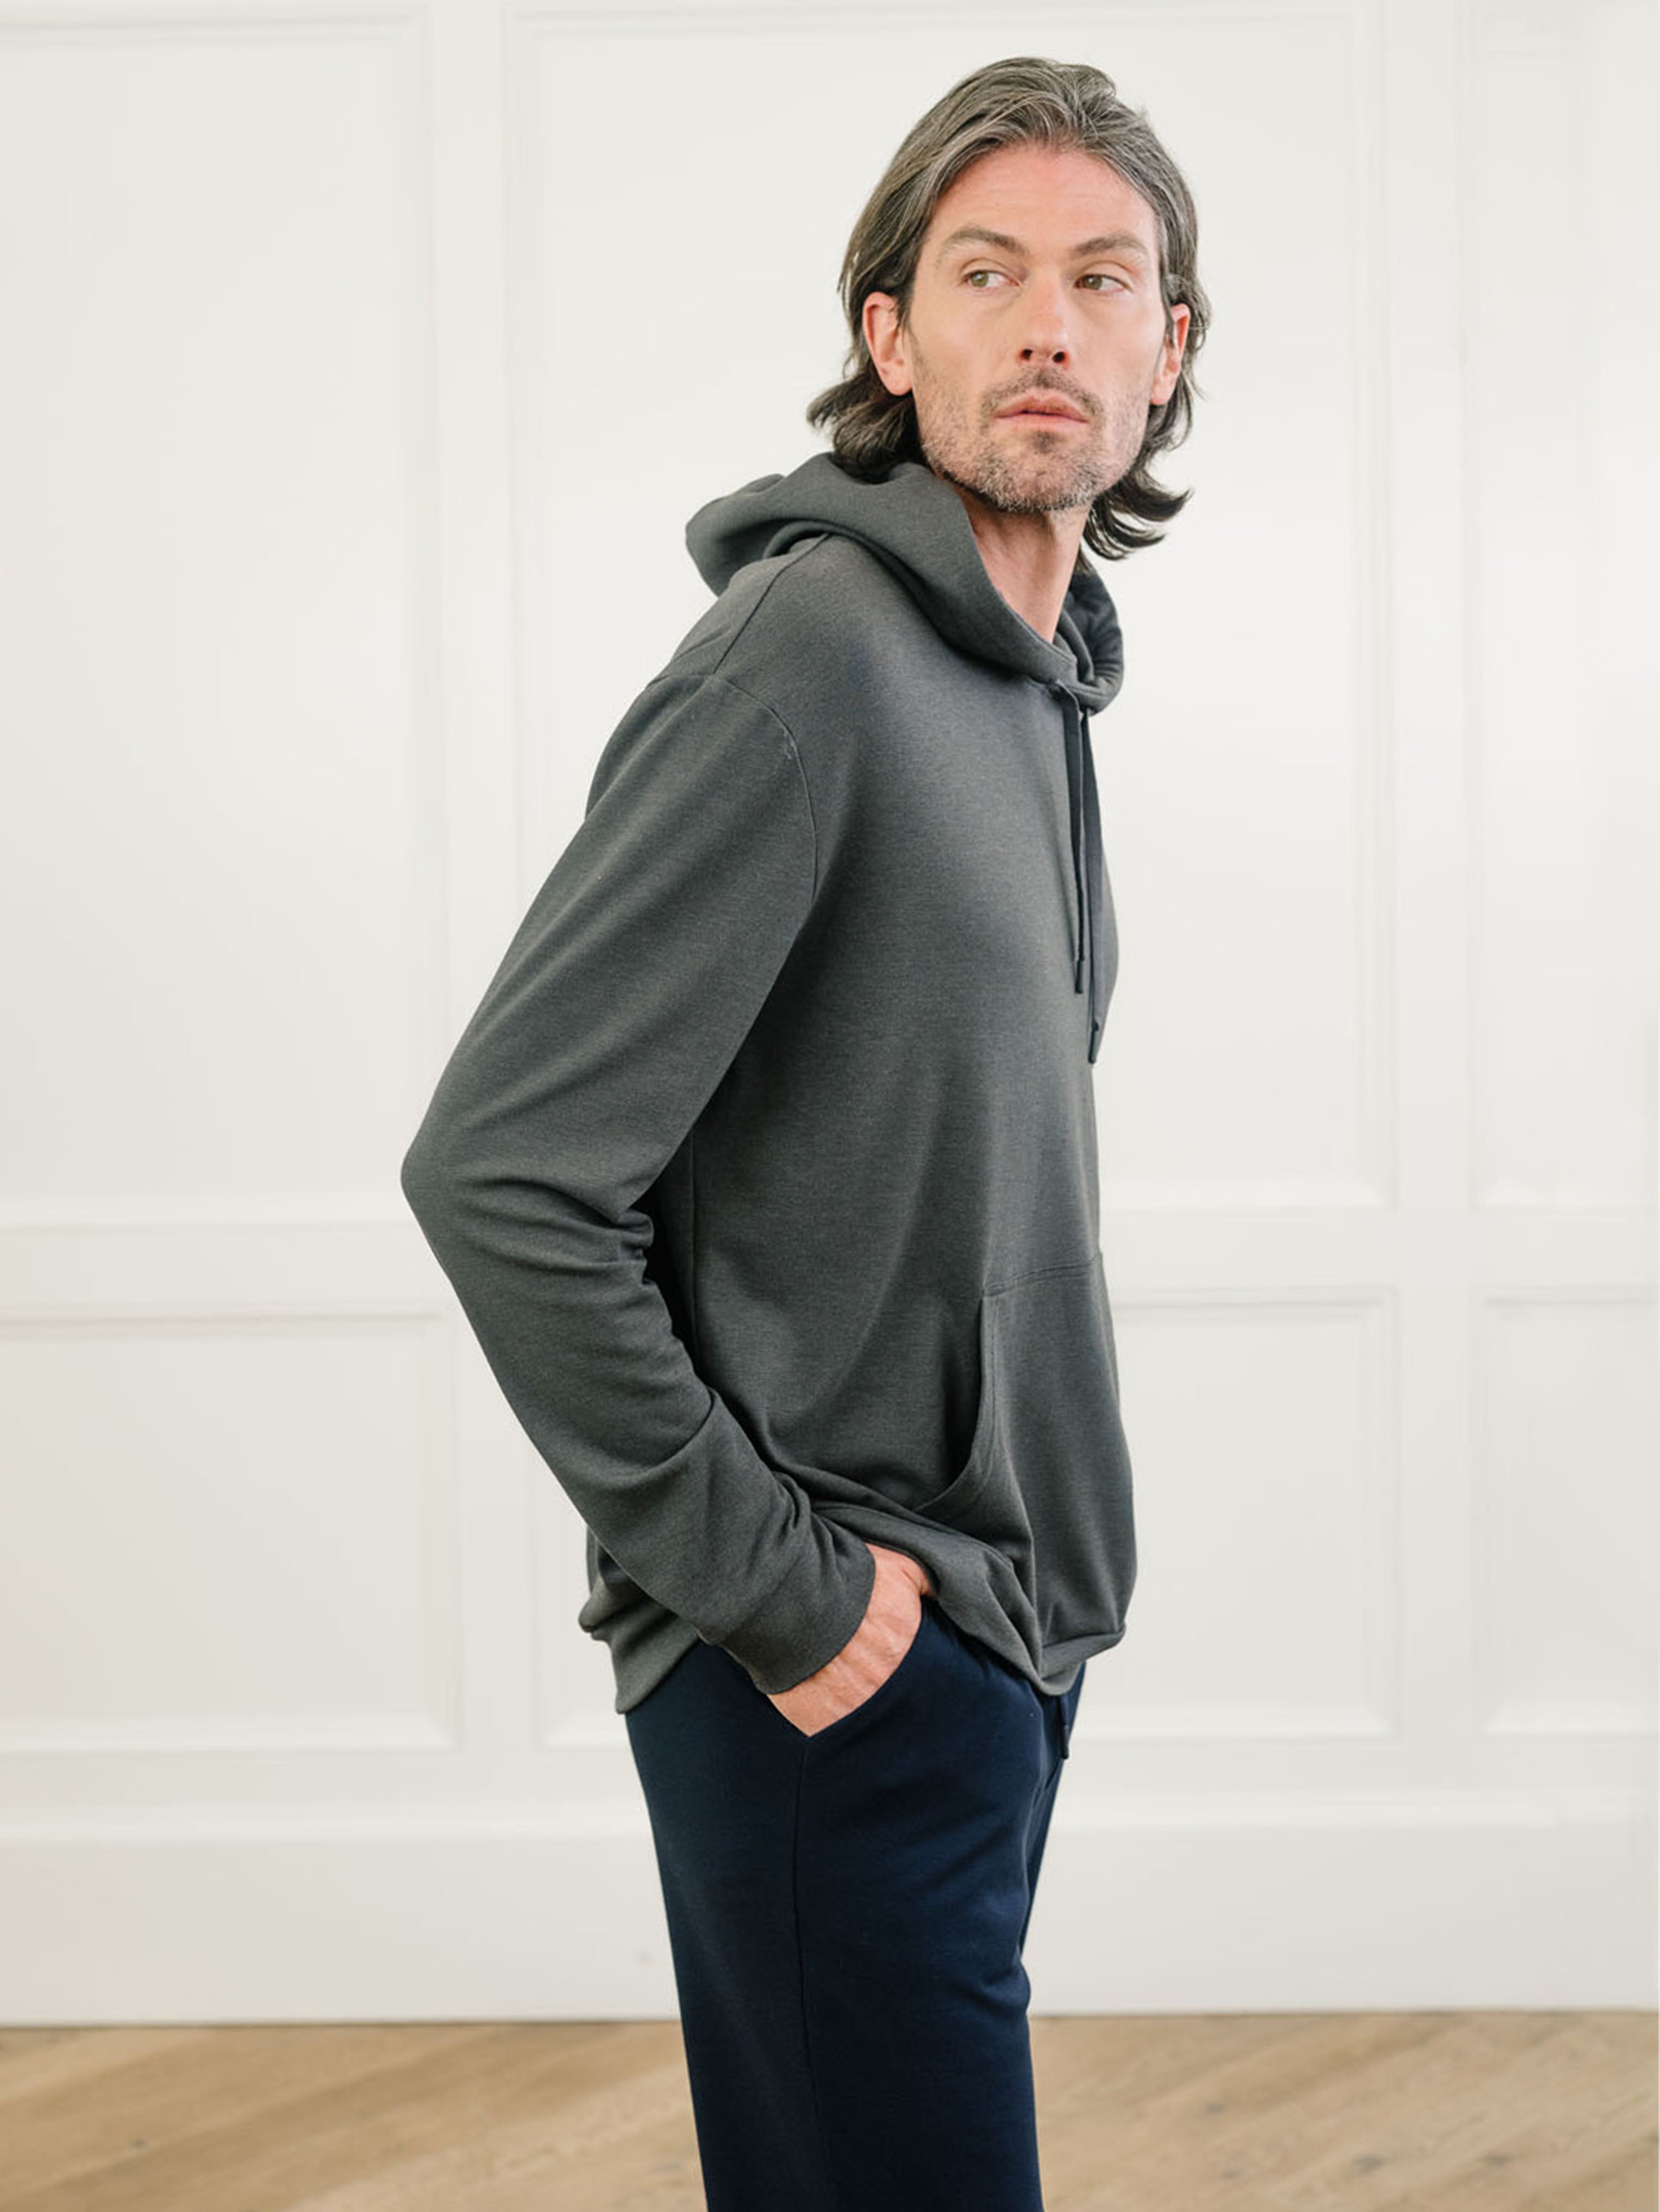 Charcoal Bamboo Hoodie worn by man standing in front of white background.|Color:Charcoal